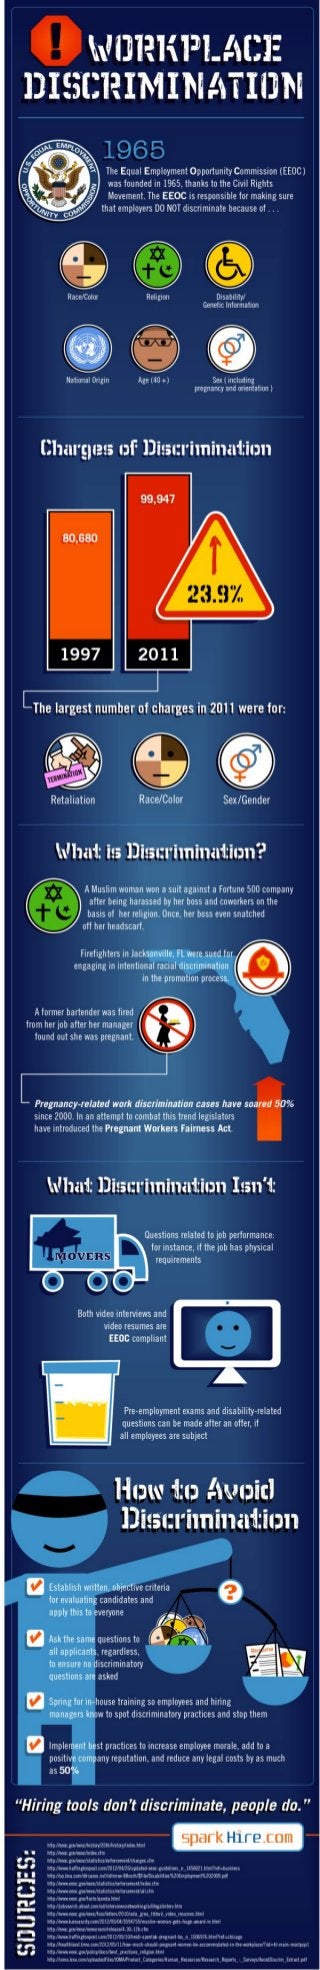 How to Avoid Workplace and Hiring Discrimination [INFOGRAPHIC]